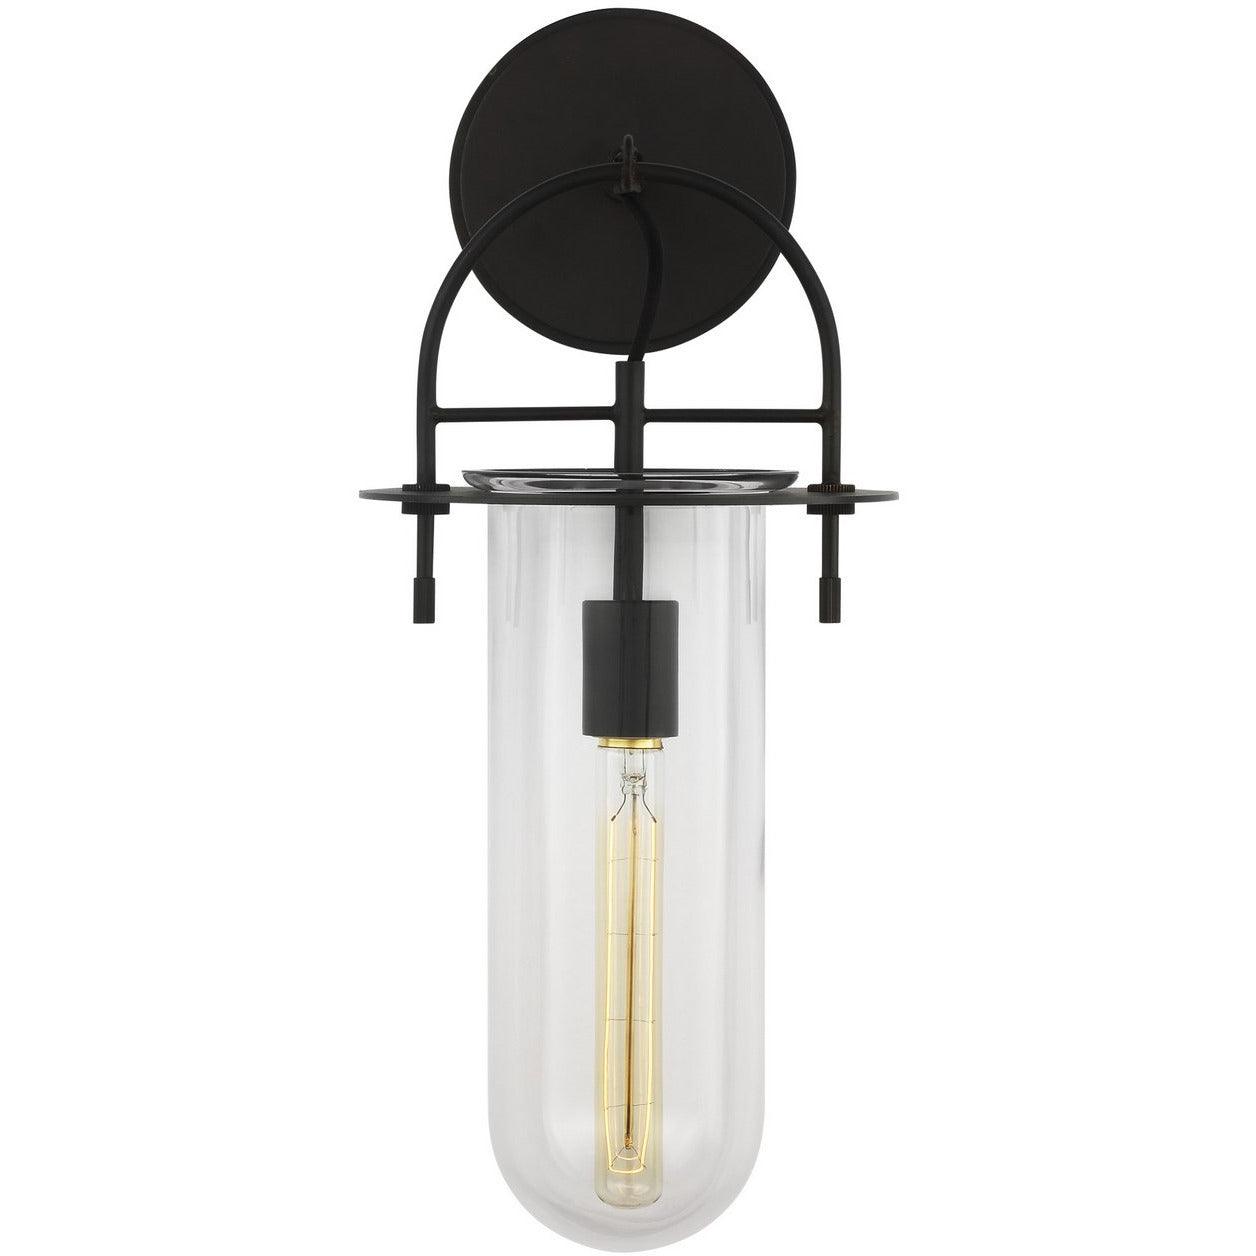 Visual Comfort Studio Collection - Nuance Wall Sconce - KW1051AI | Montreal Lighting & Hardware